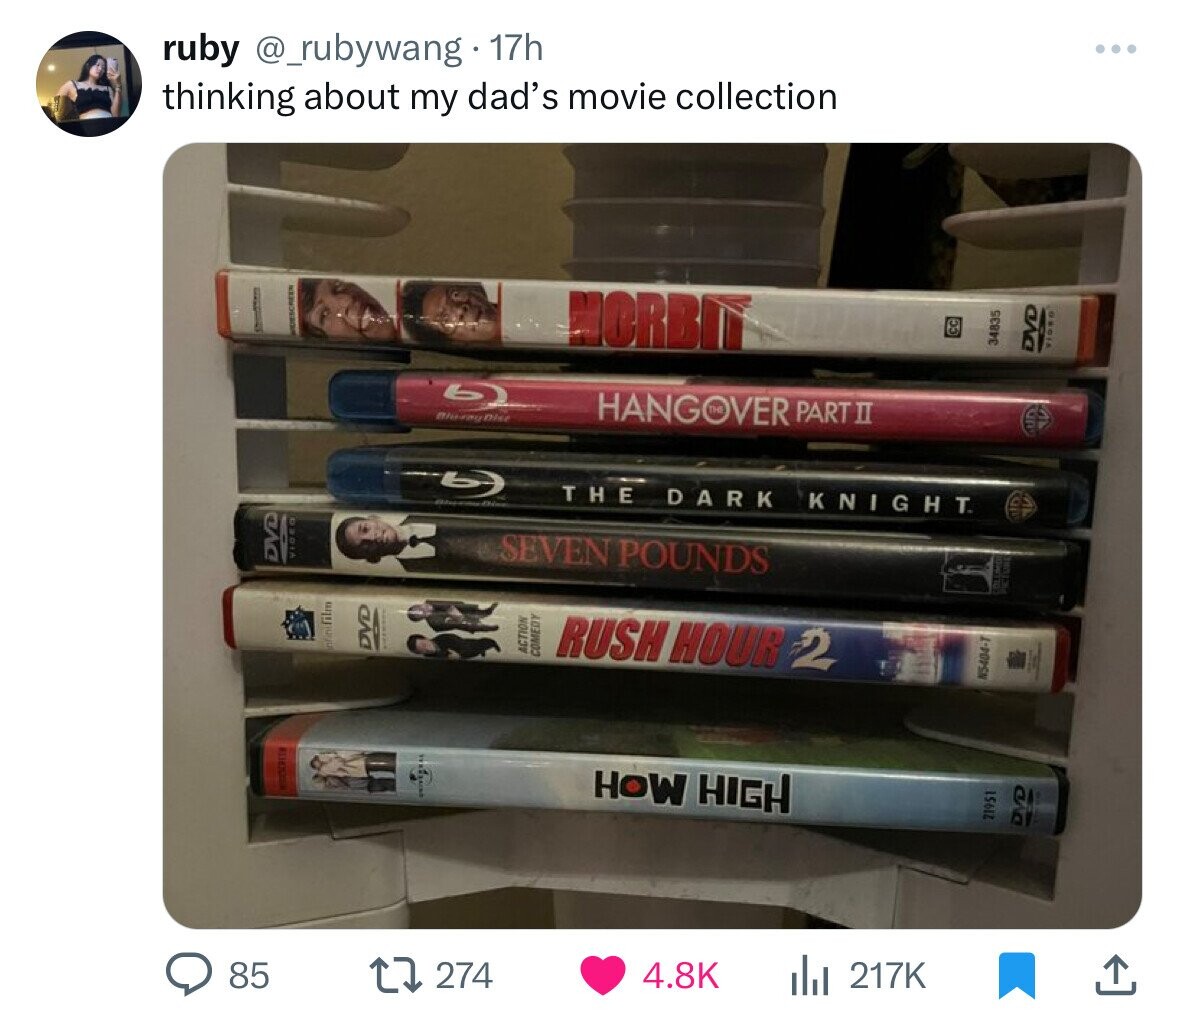 ruby . 17h thinking about my dad's movie collection Rag 85 C Muray Dist 274 Horbit Hangover Part Ii The Dark Seven Pounds Rush Hour 2 How High Knight. 53 il Serve LPopen 15612 Dvd Ml 51 Kan